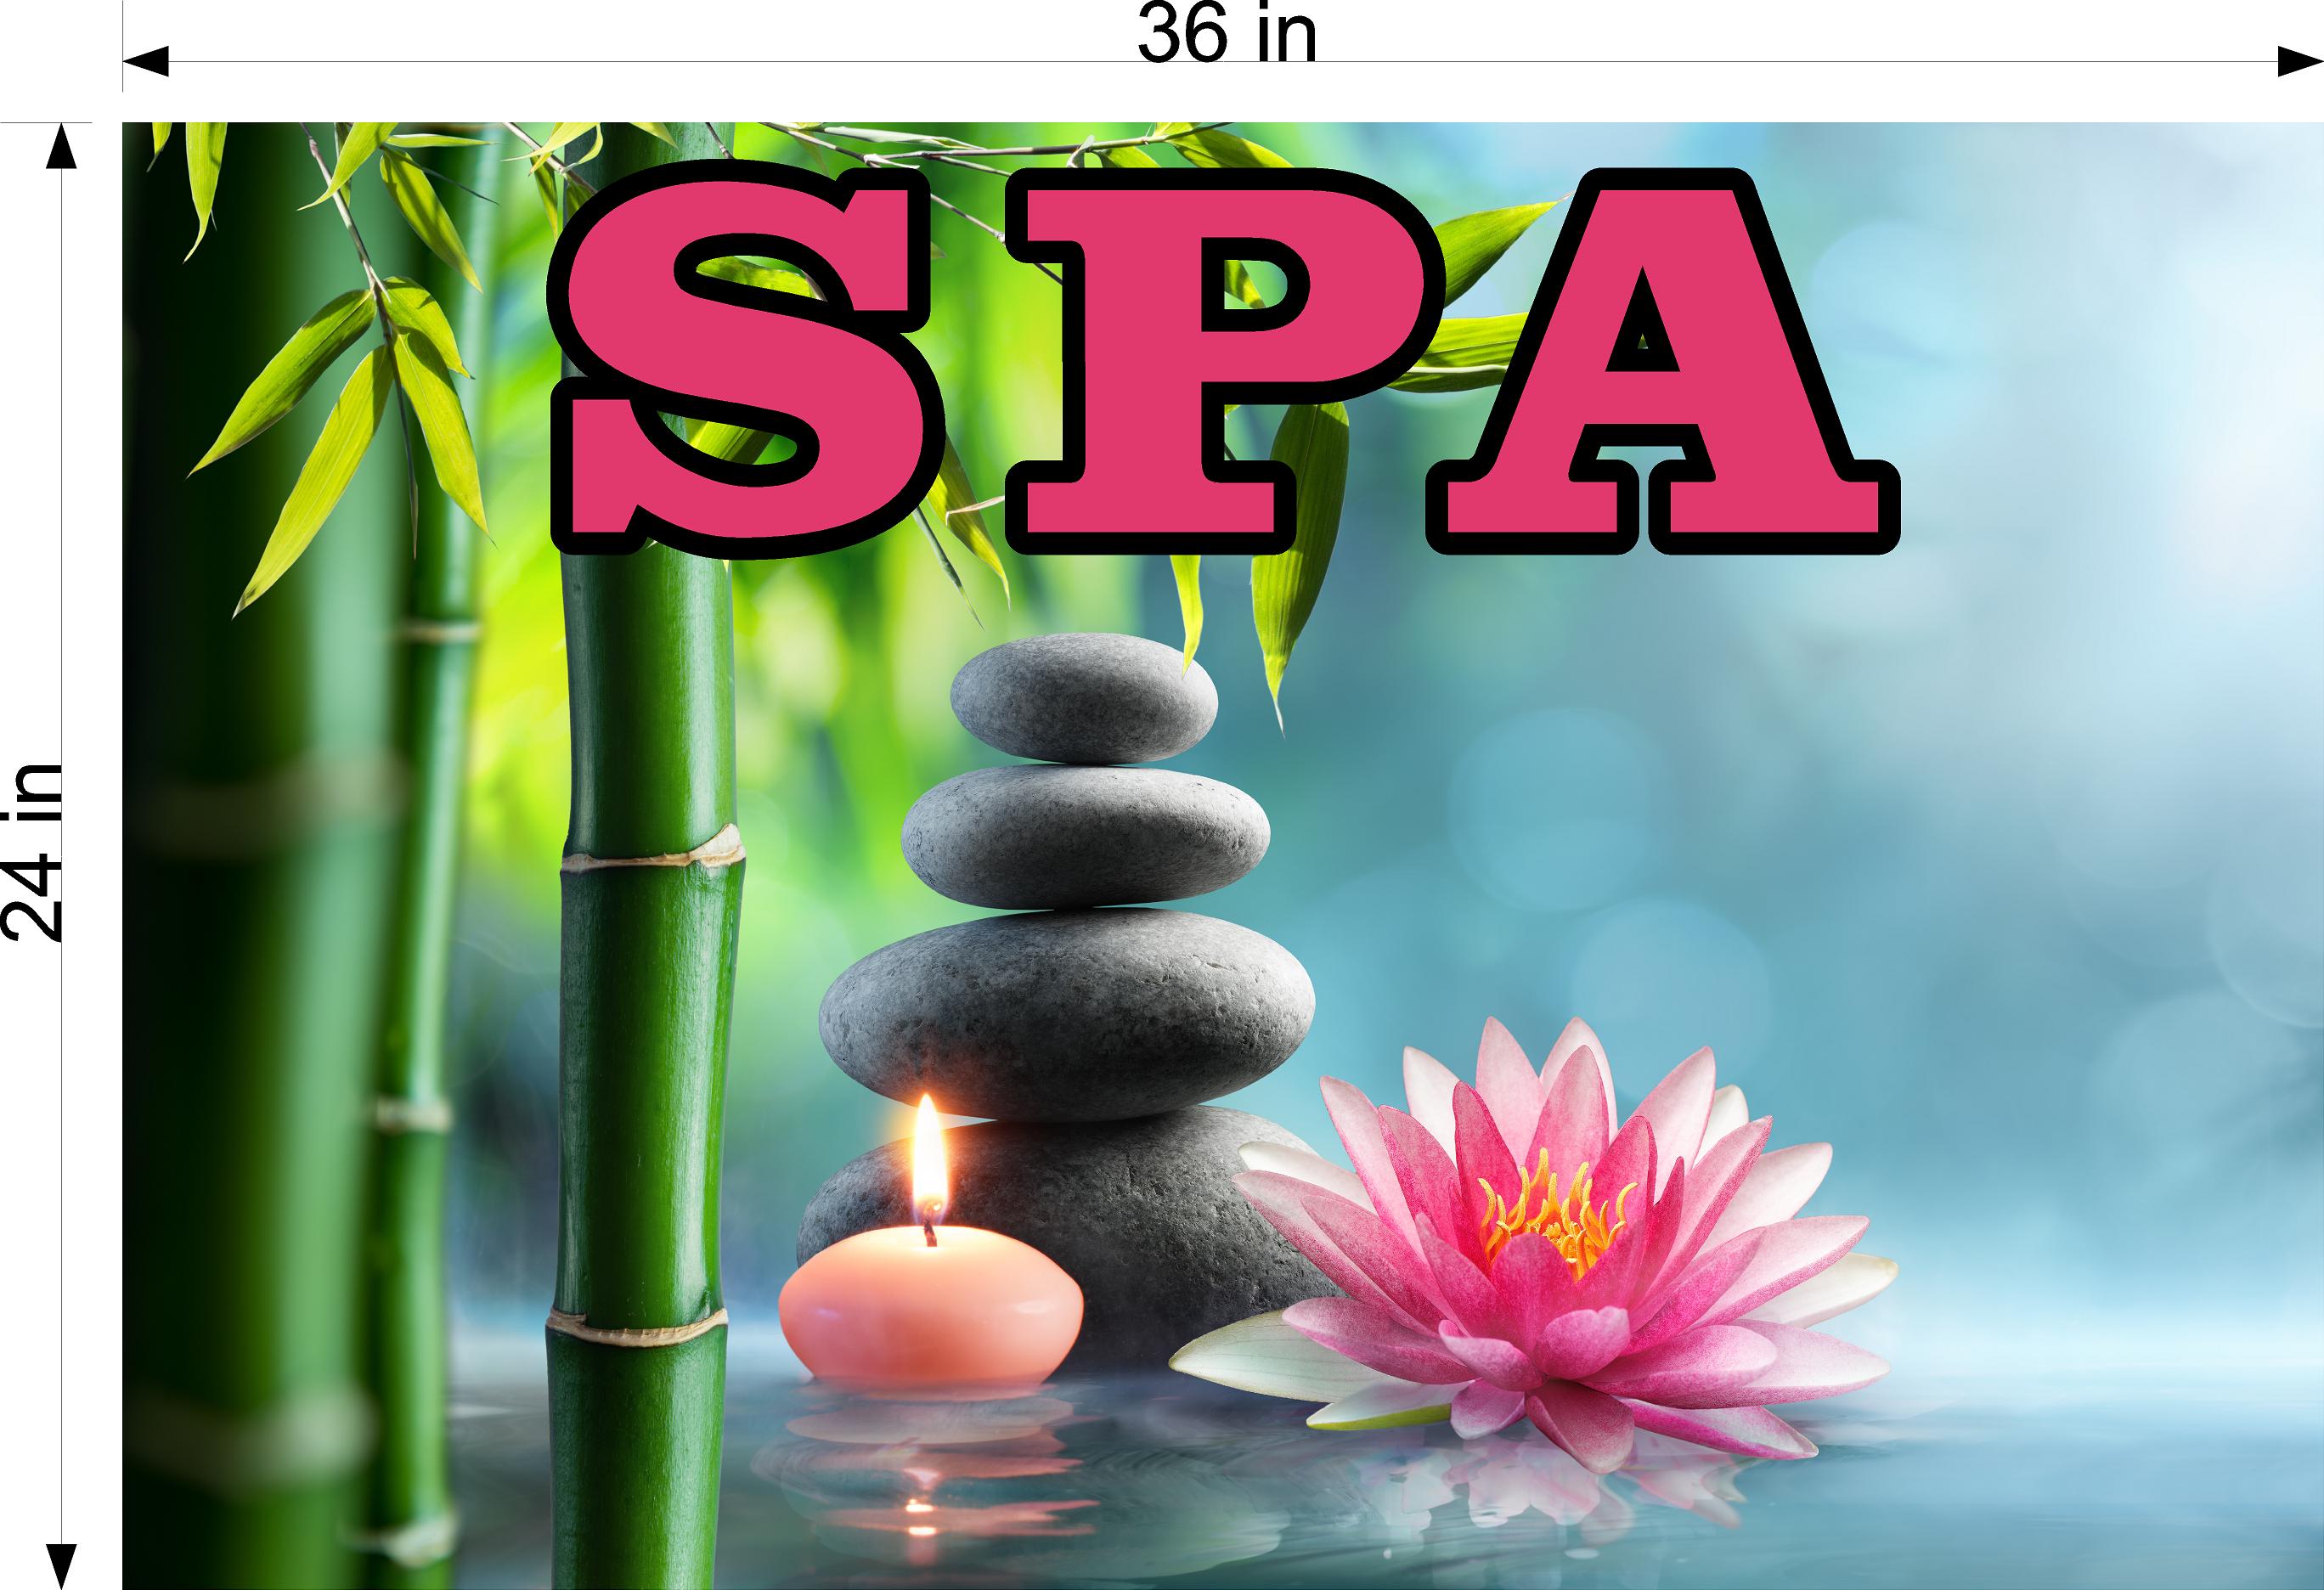 Spa 09 Wallpaper Poster Decal with Adhesive Backing Wall Sticker Decor Indoors Interior Sign Horizontal